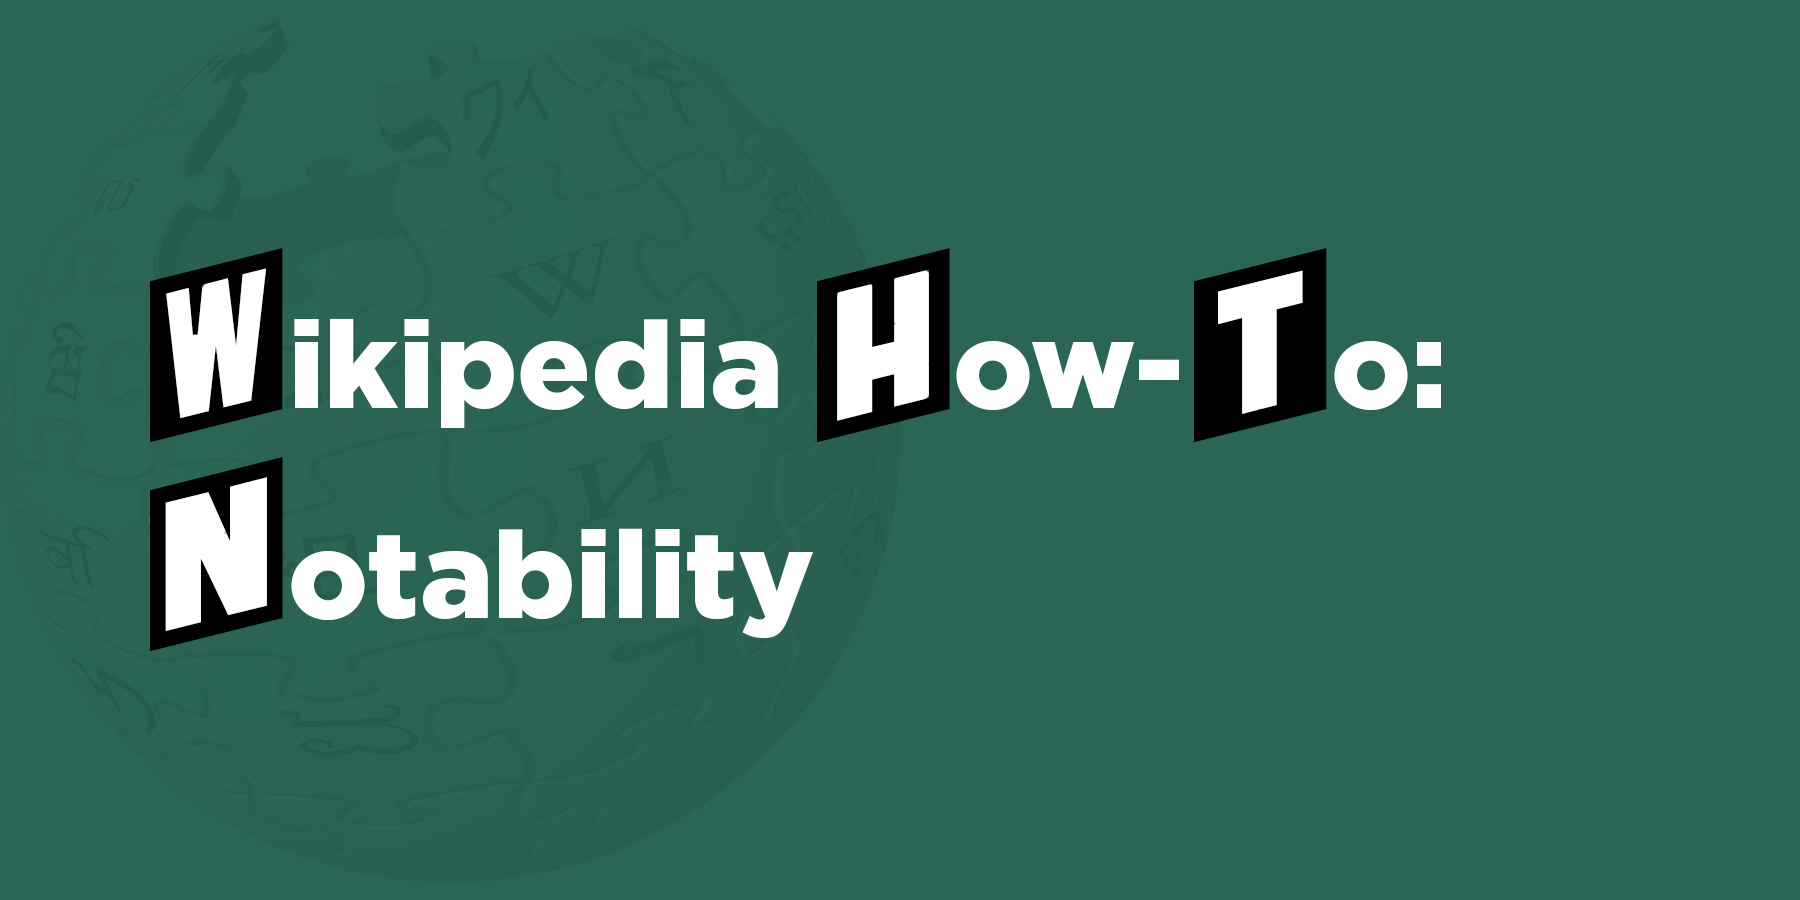 Wikipedia How-To: Notability